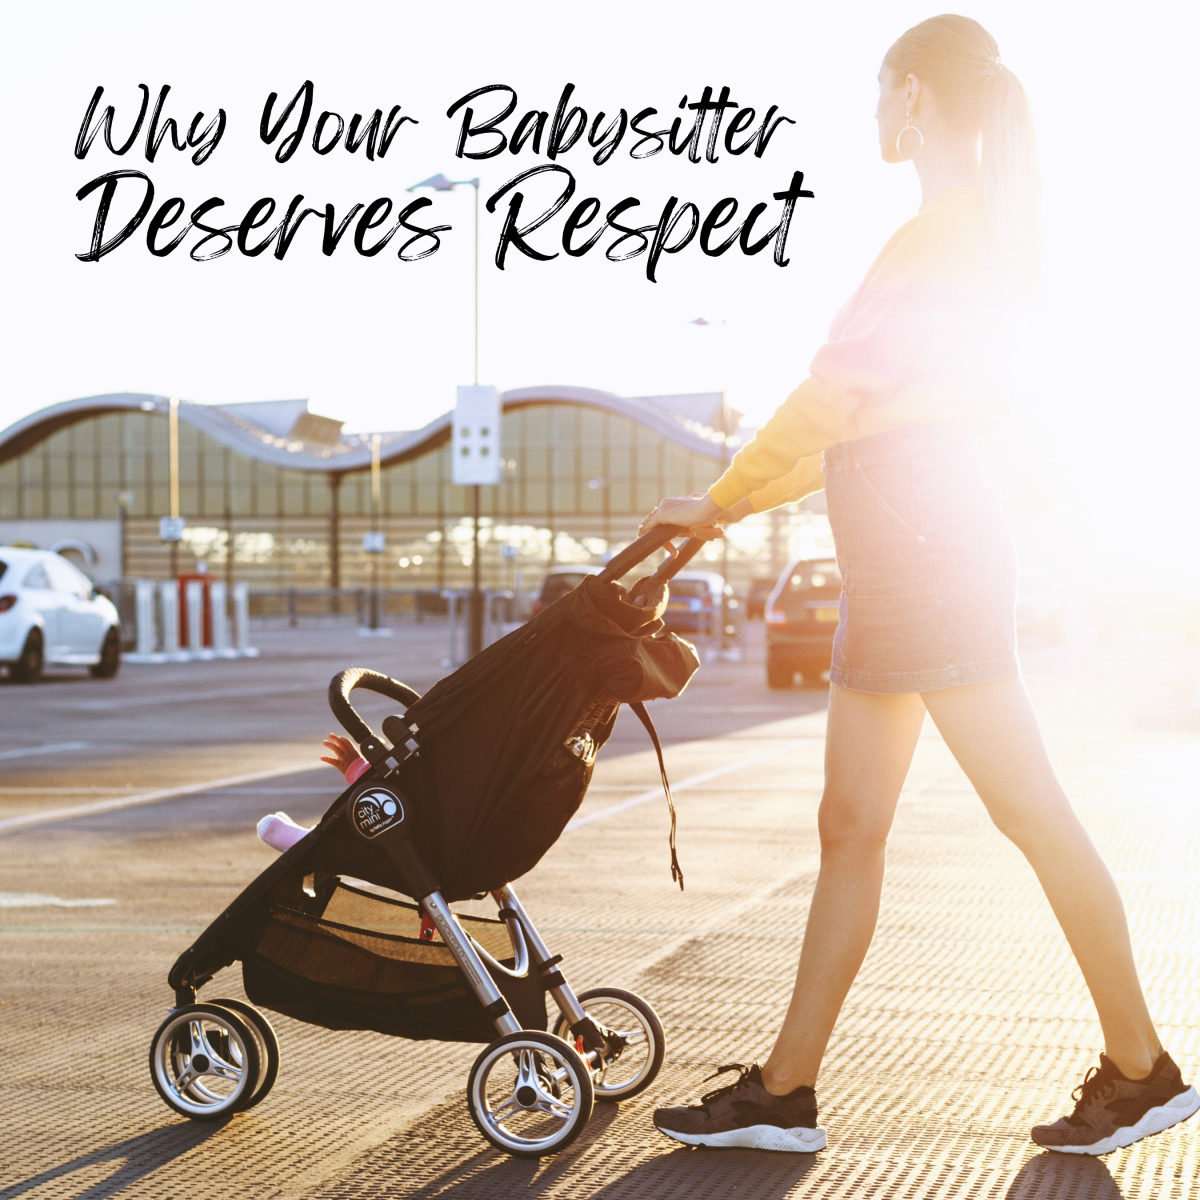 Why You Should Treat Your Babysitter With Respect